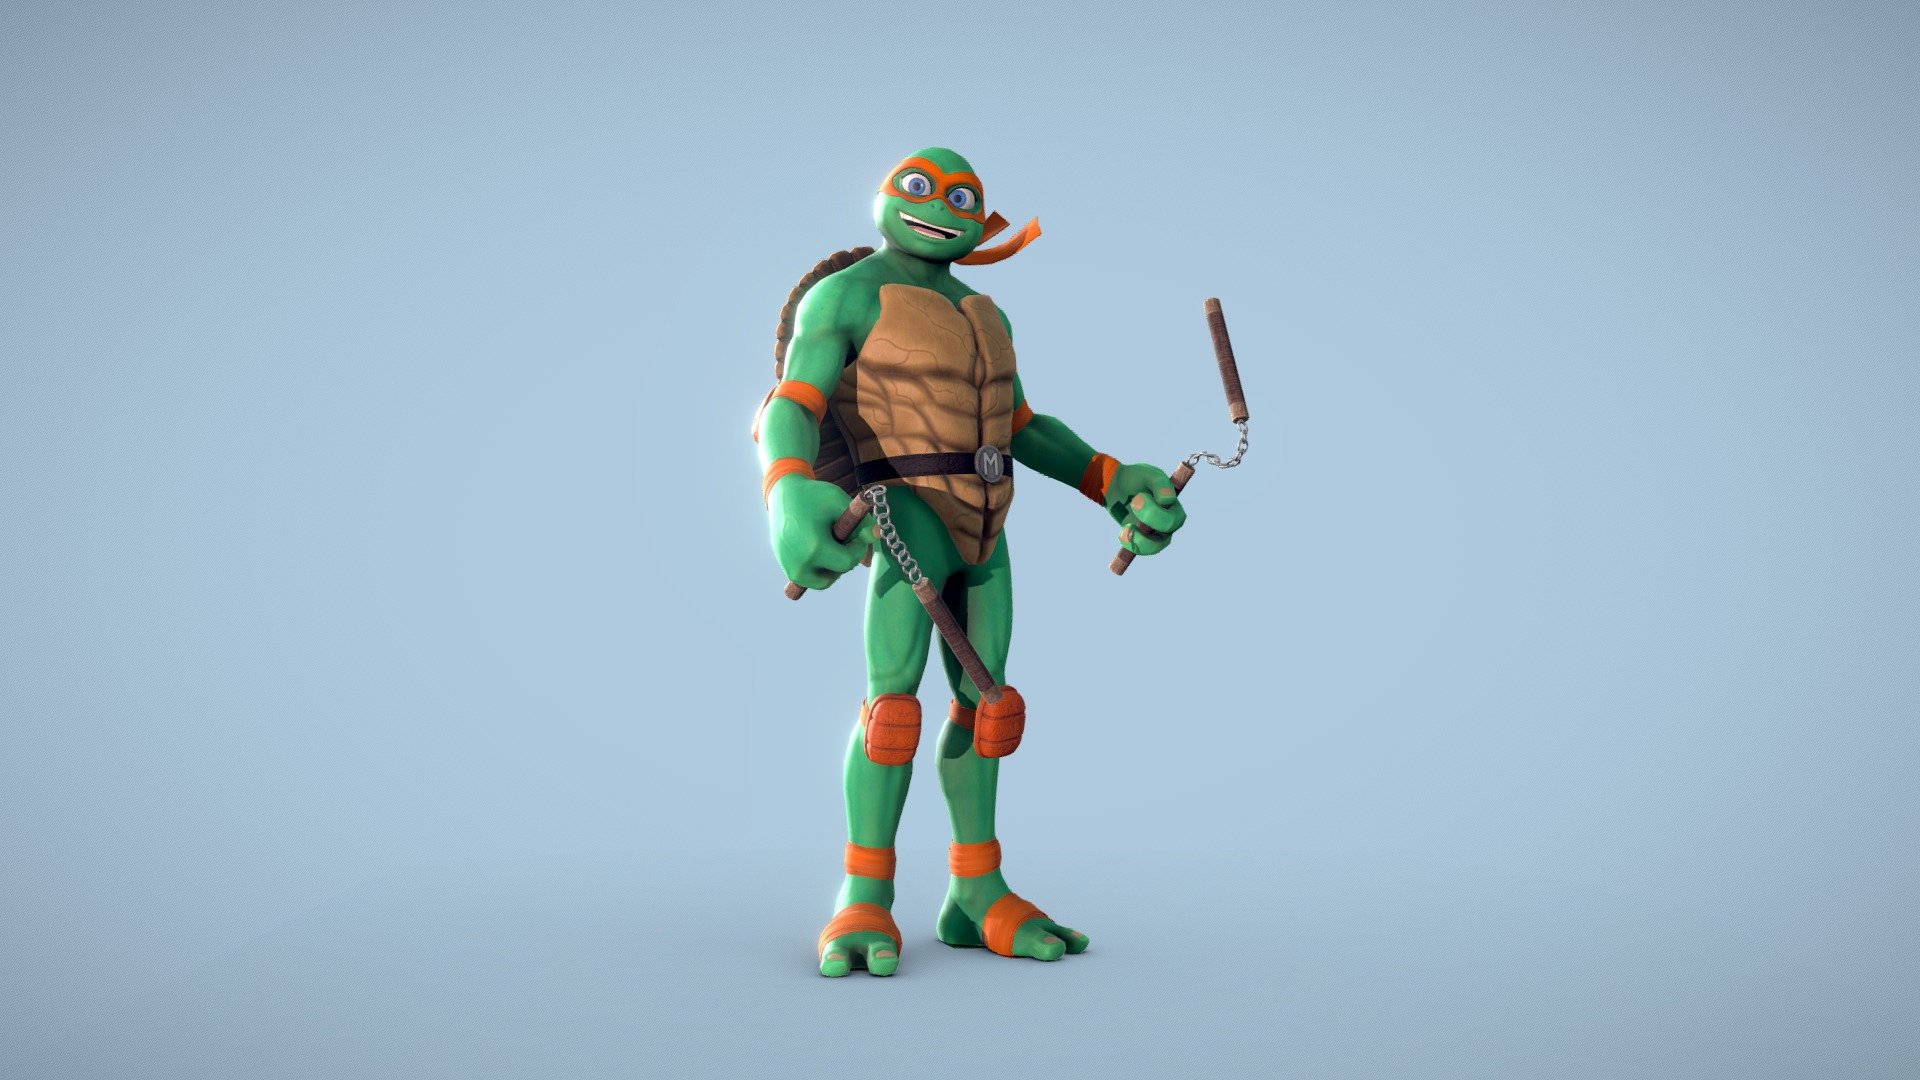 Michelangelo from the TMNT universe updated to my own stylized style.

Take a look of the Teenage mutant ninja turtles collection.

This model includes an A-pose version to get rigged and the High poly version of the body 3d model